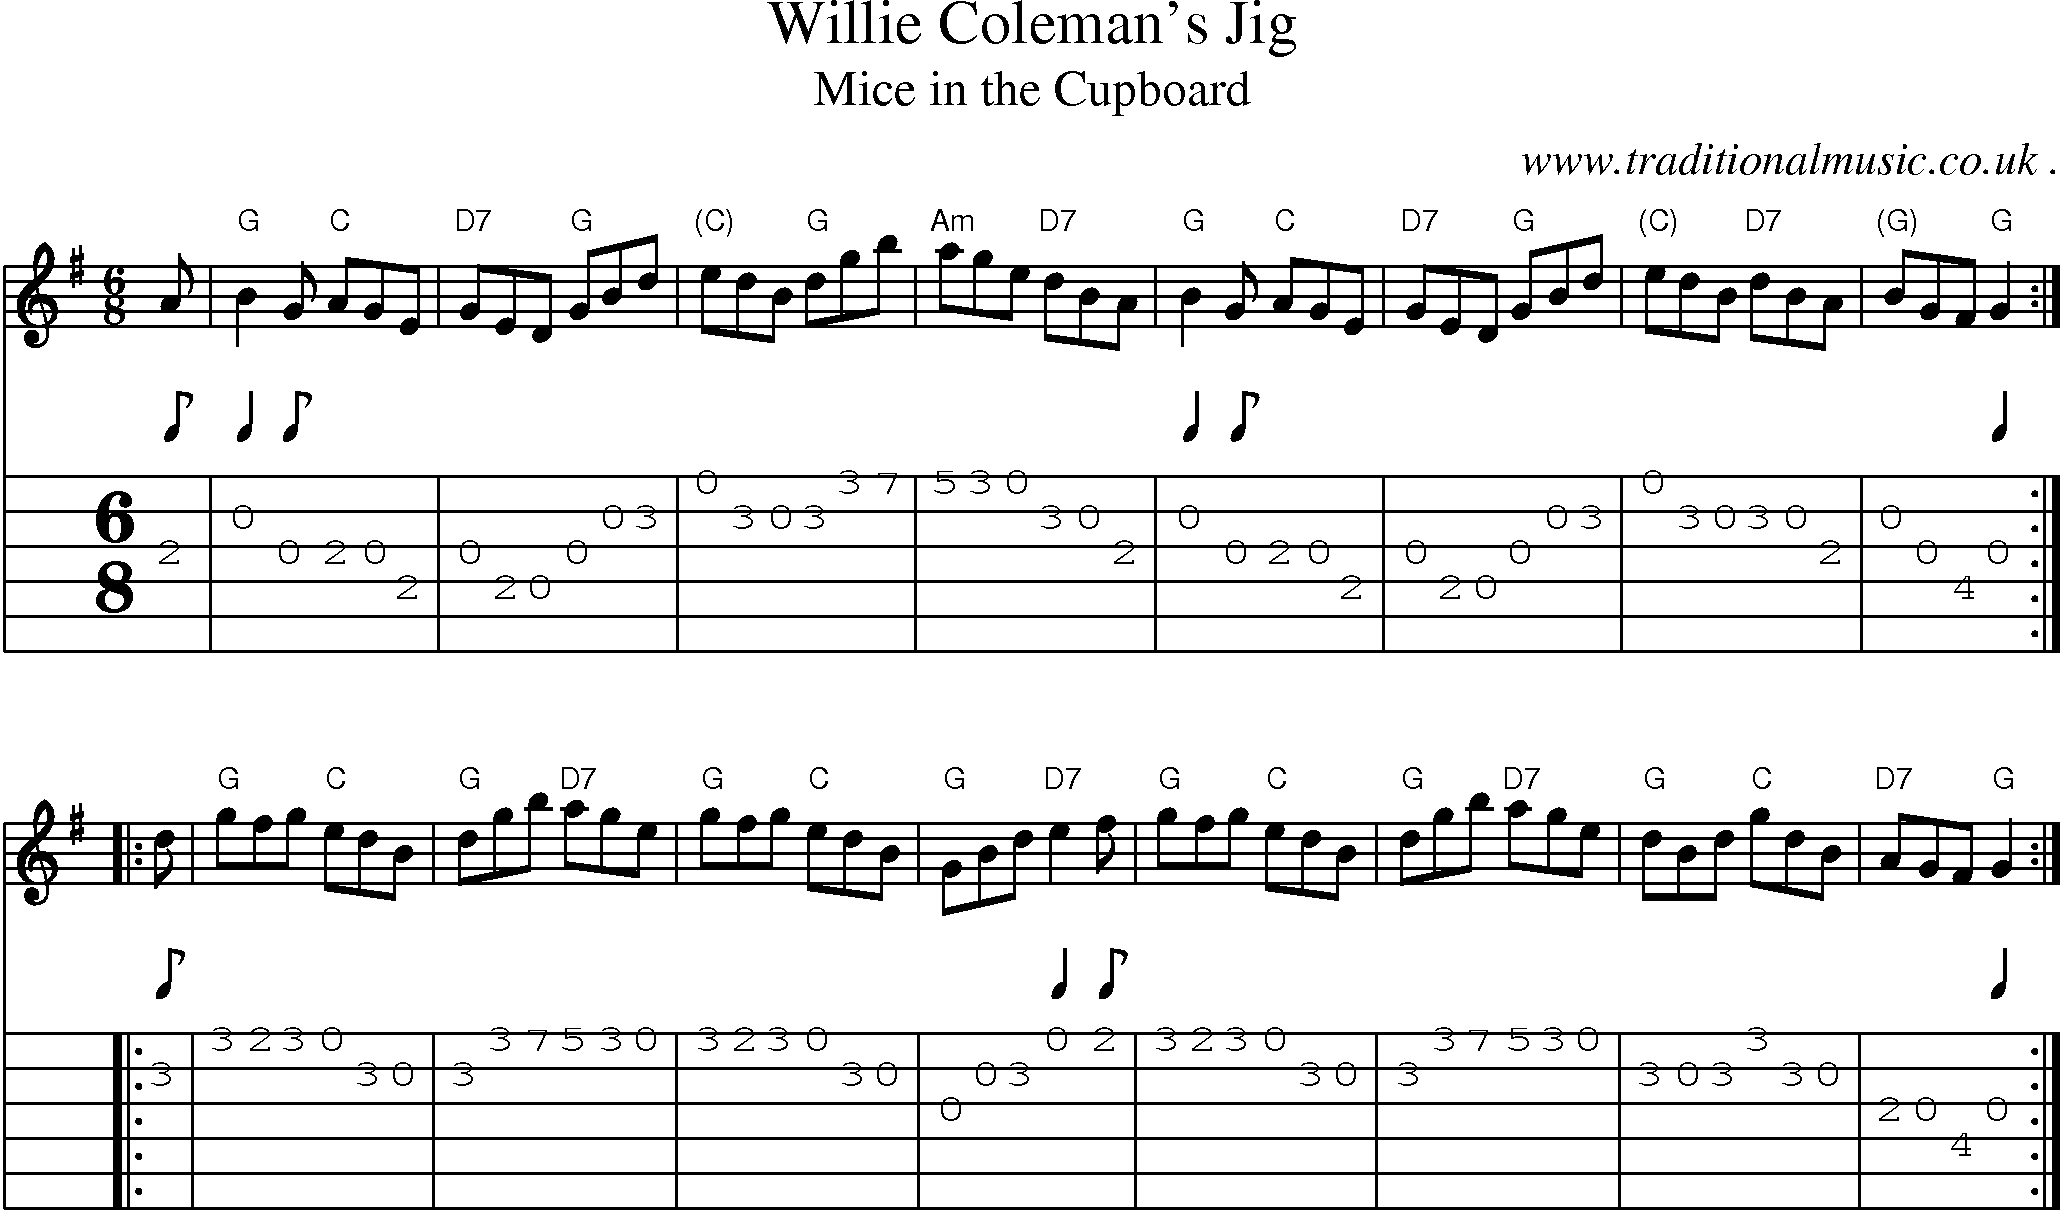 Sheet-music  score, Chords and Guitar Tabs for Willie Colemans Jig